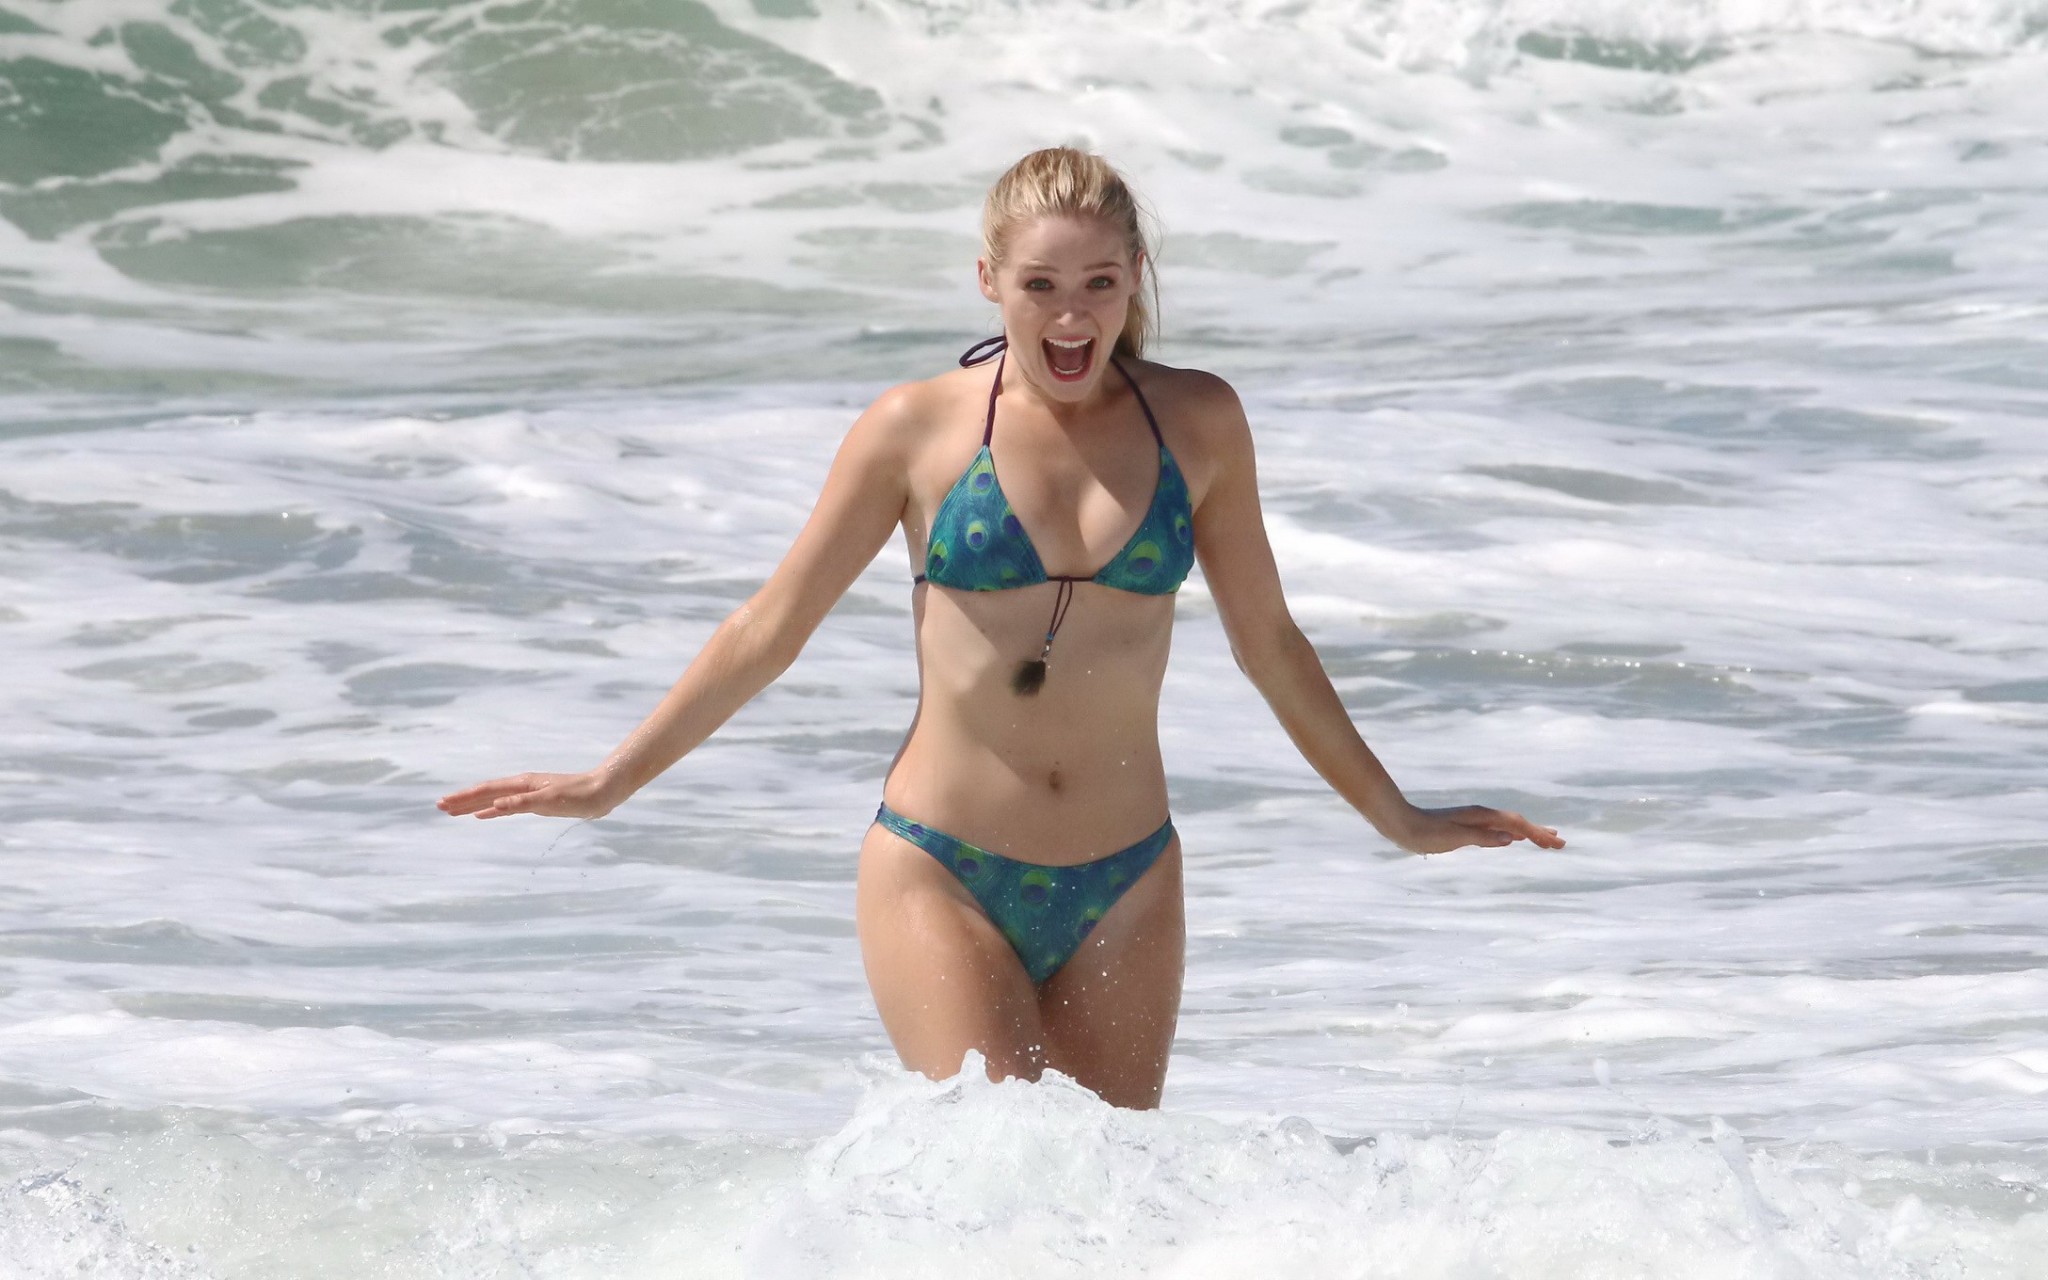 Greer Grammer busty in tiny peacock feather print bikini at the beach in Los Ang #75168214